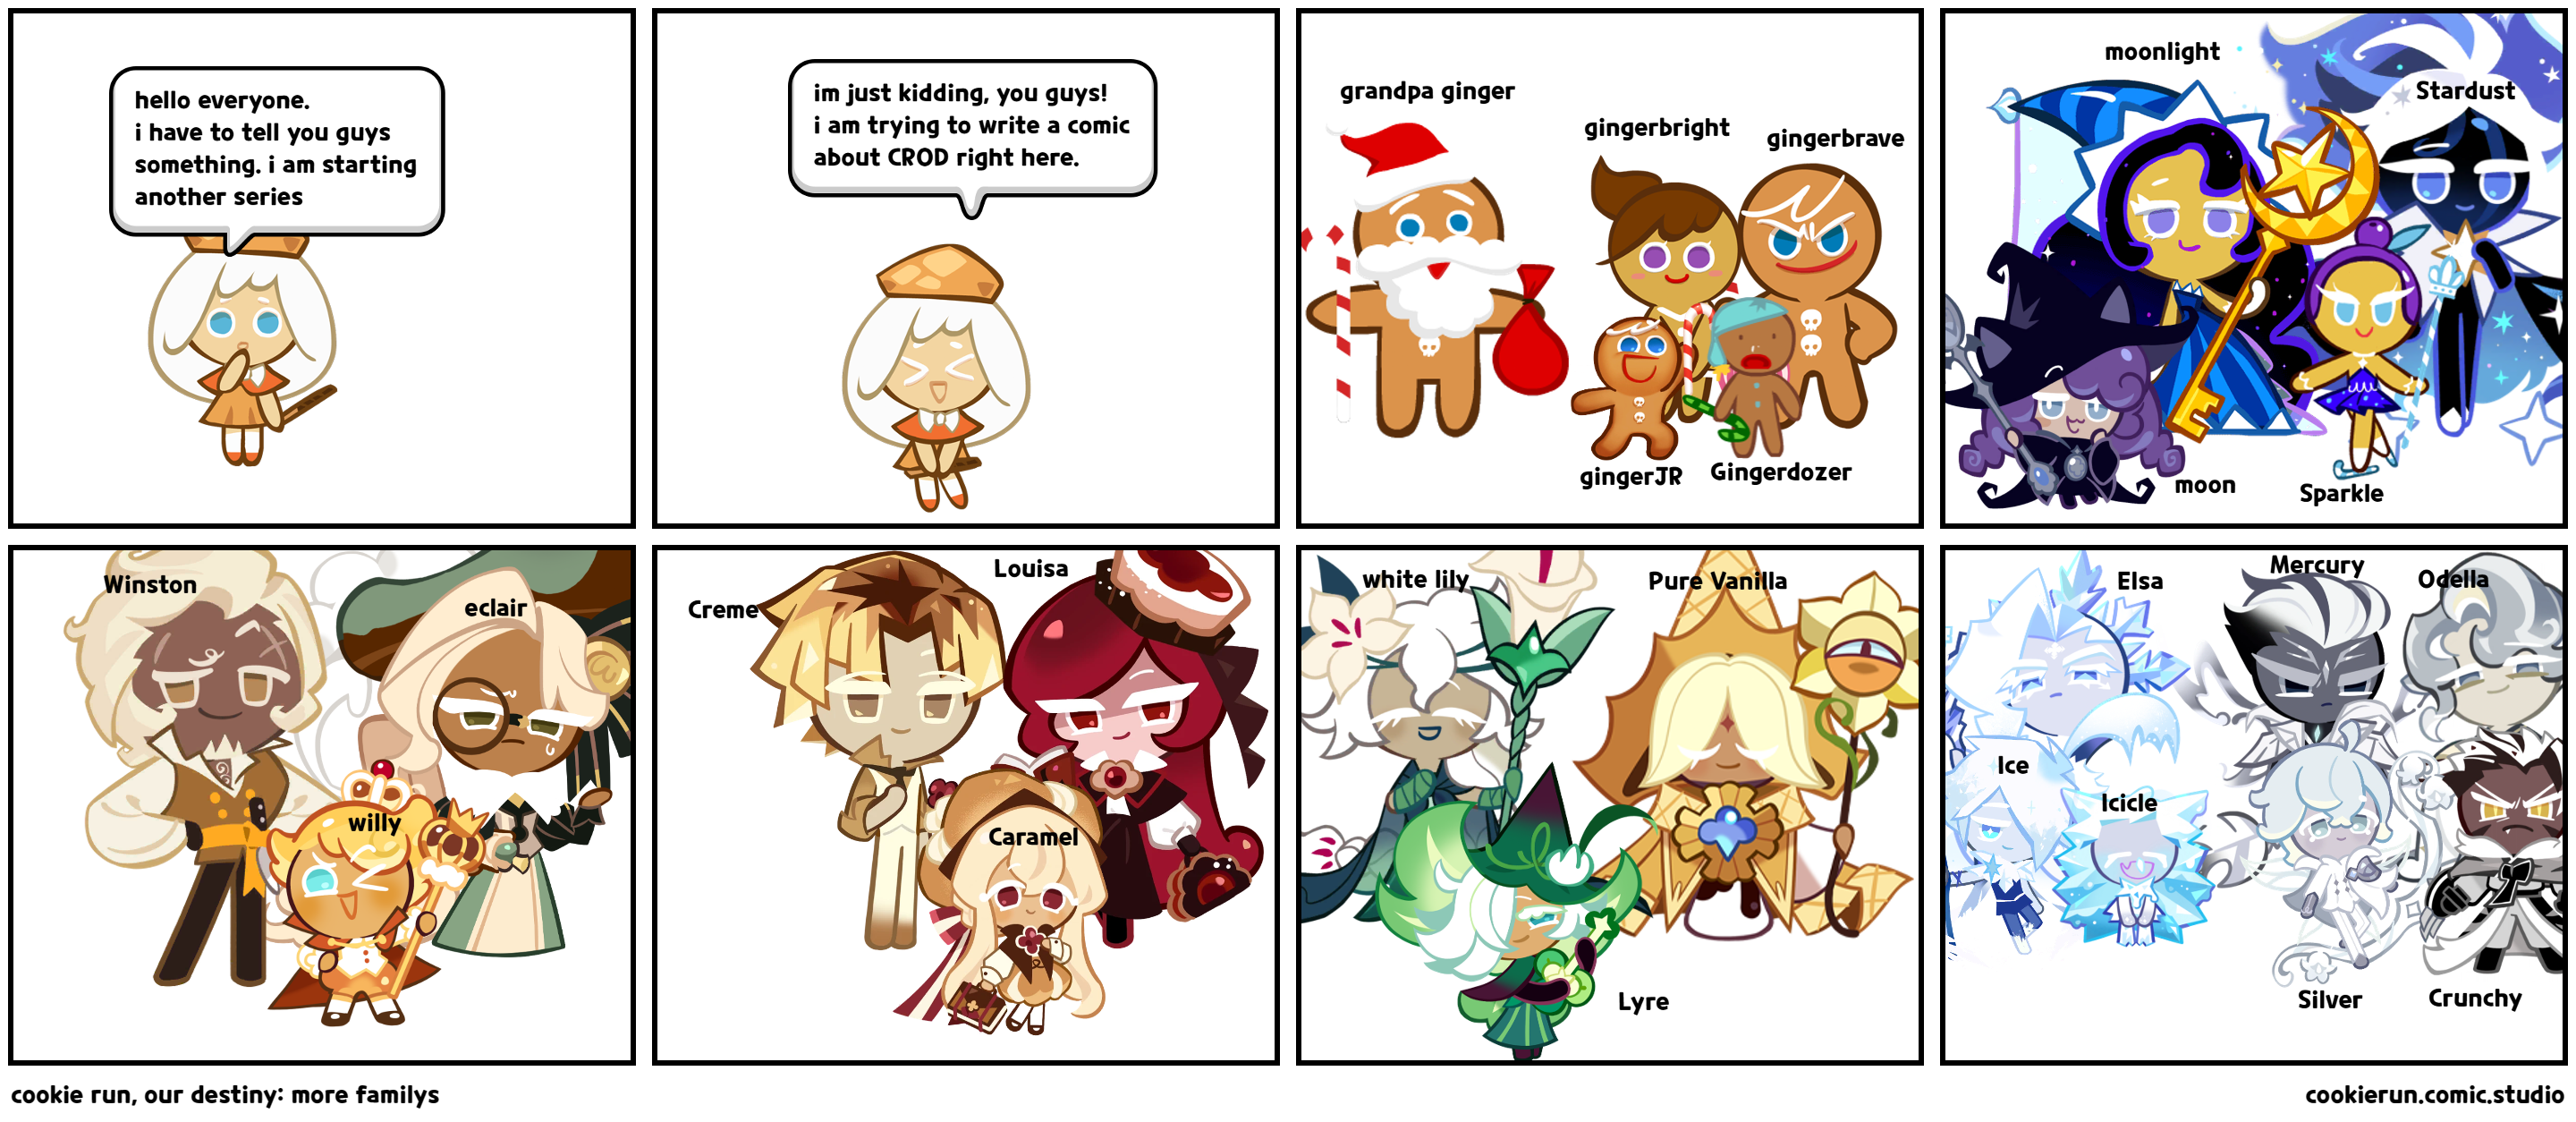 cookie run, our destiny: more familys